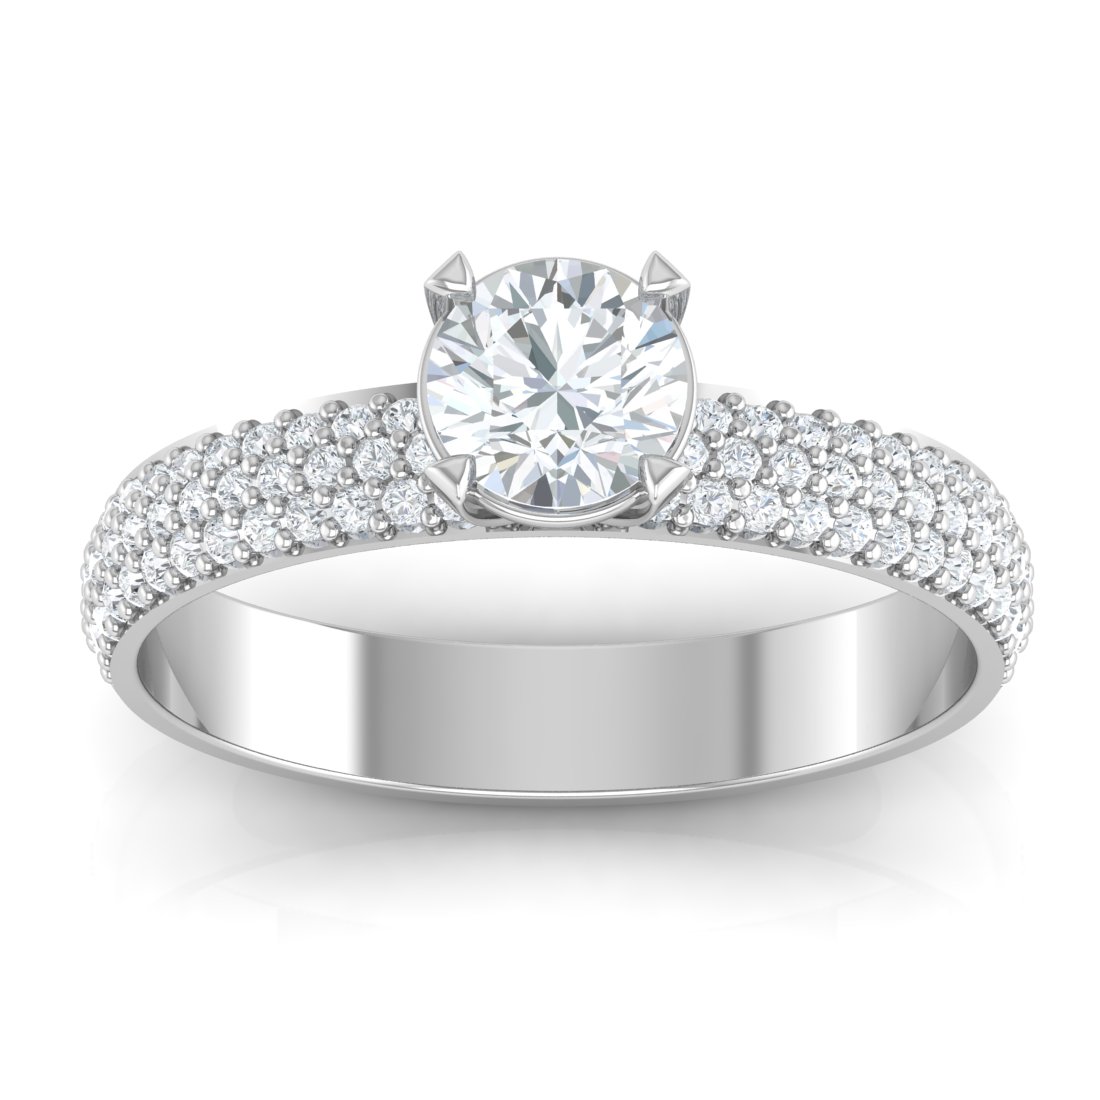 Engagement ring guide | Pave setting ring